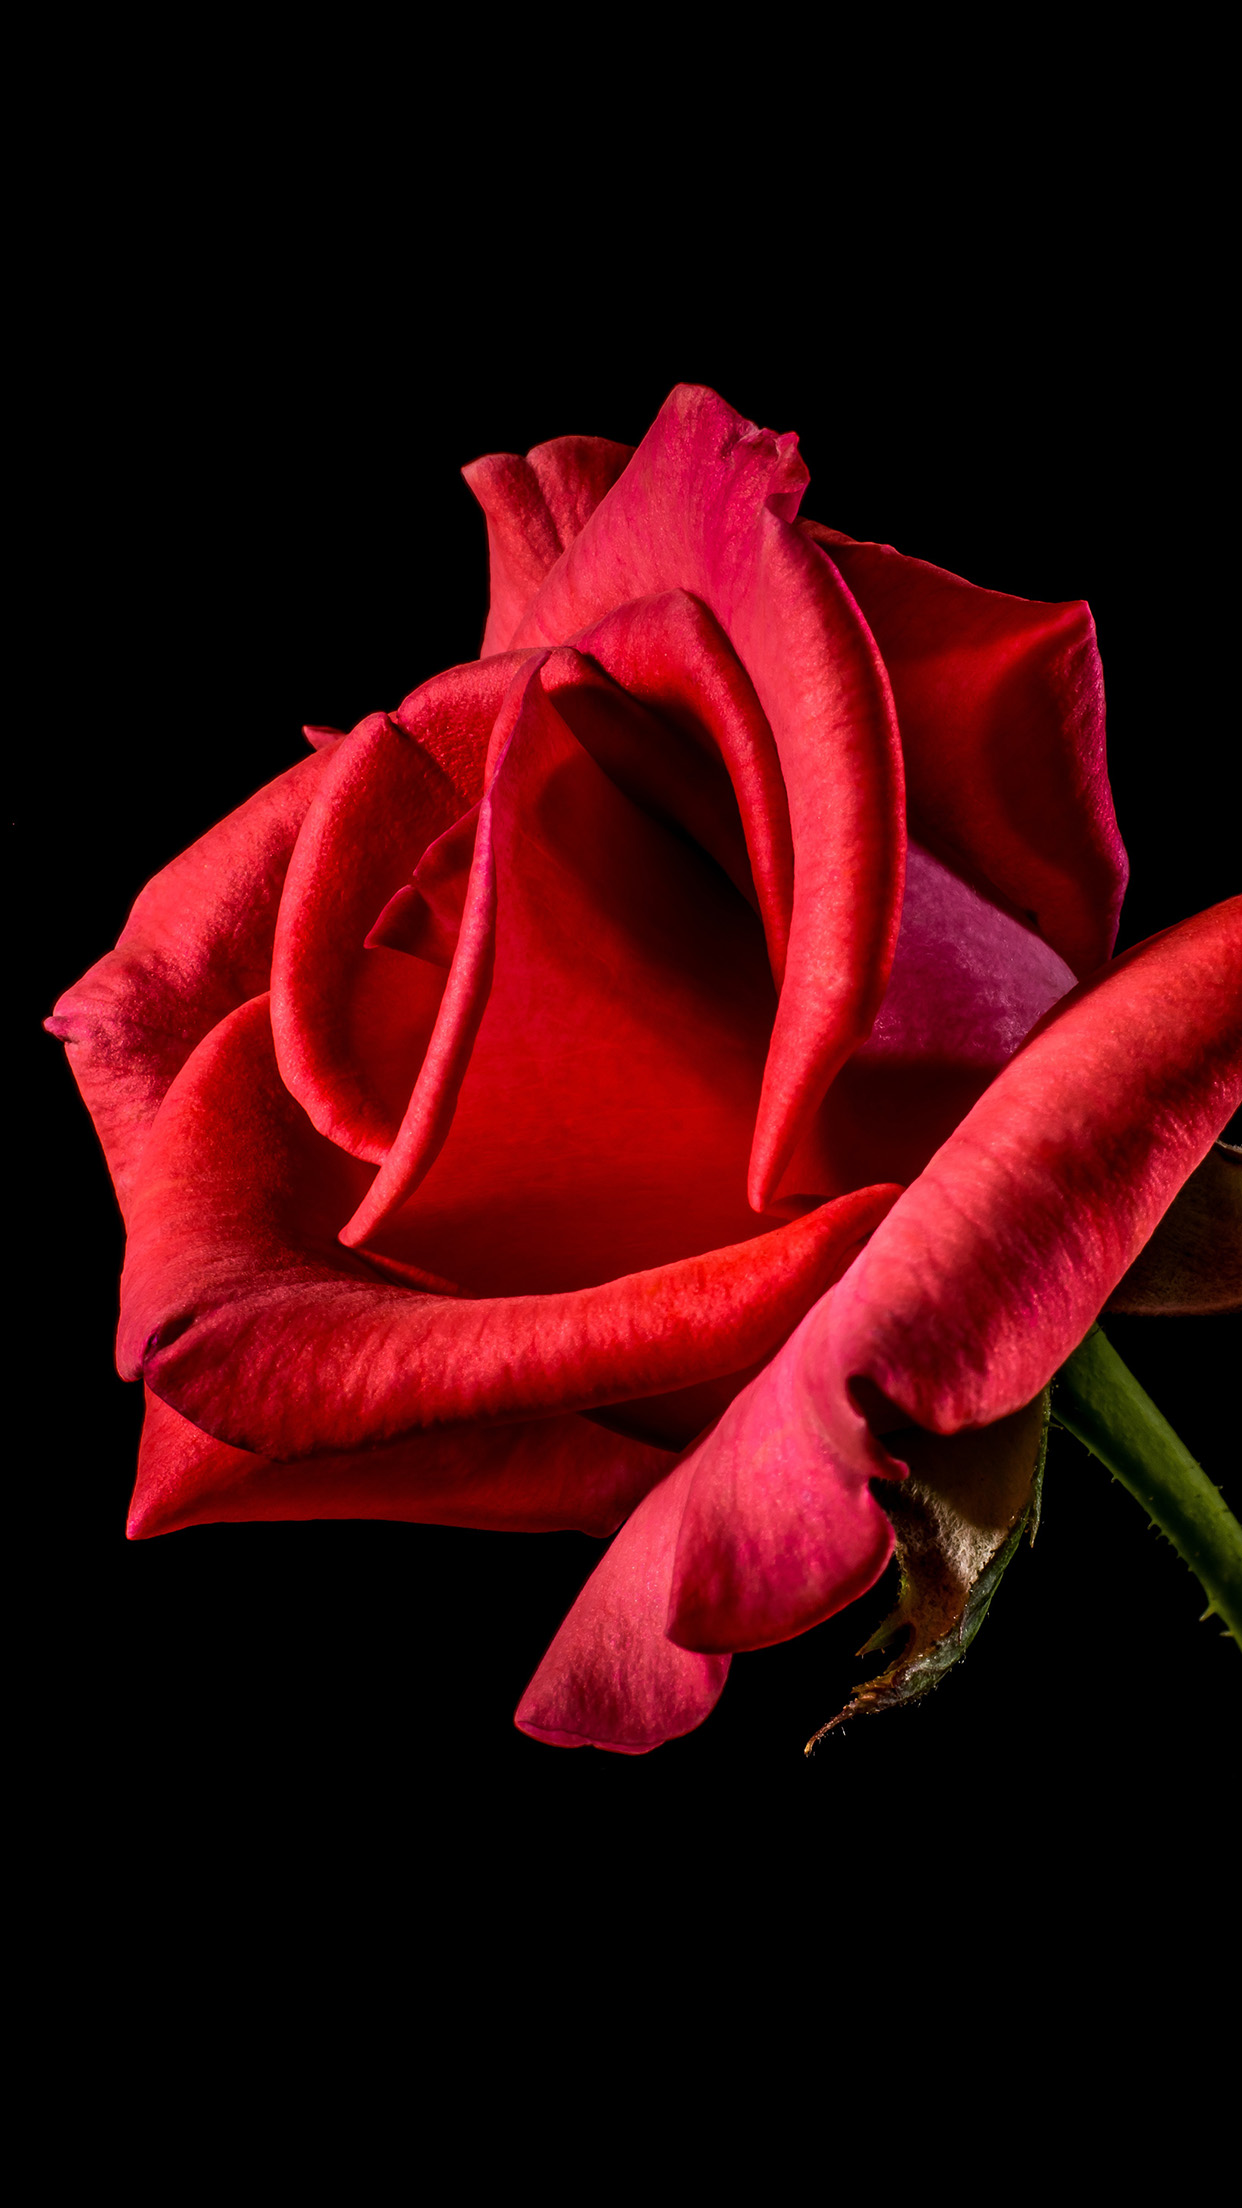 Flower Rose Red Dark Beautiful Best Nature Android Happy